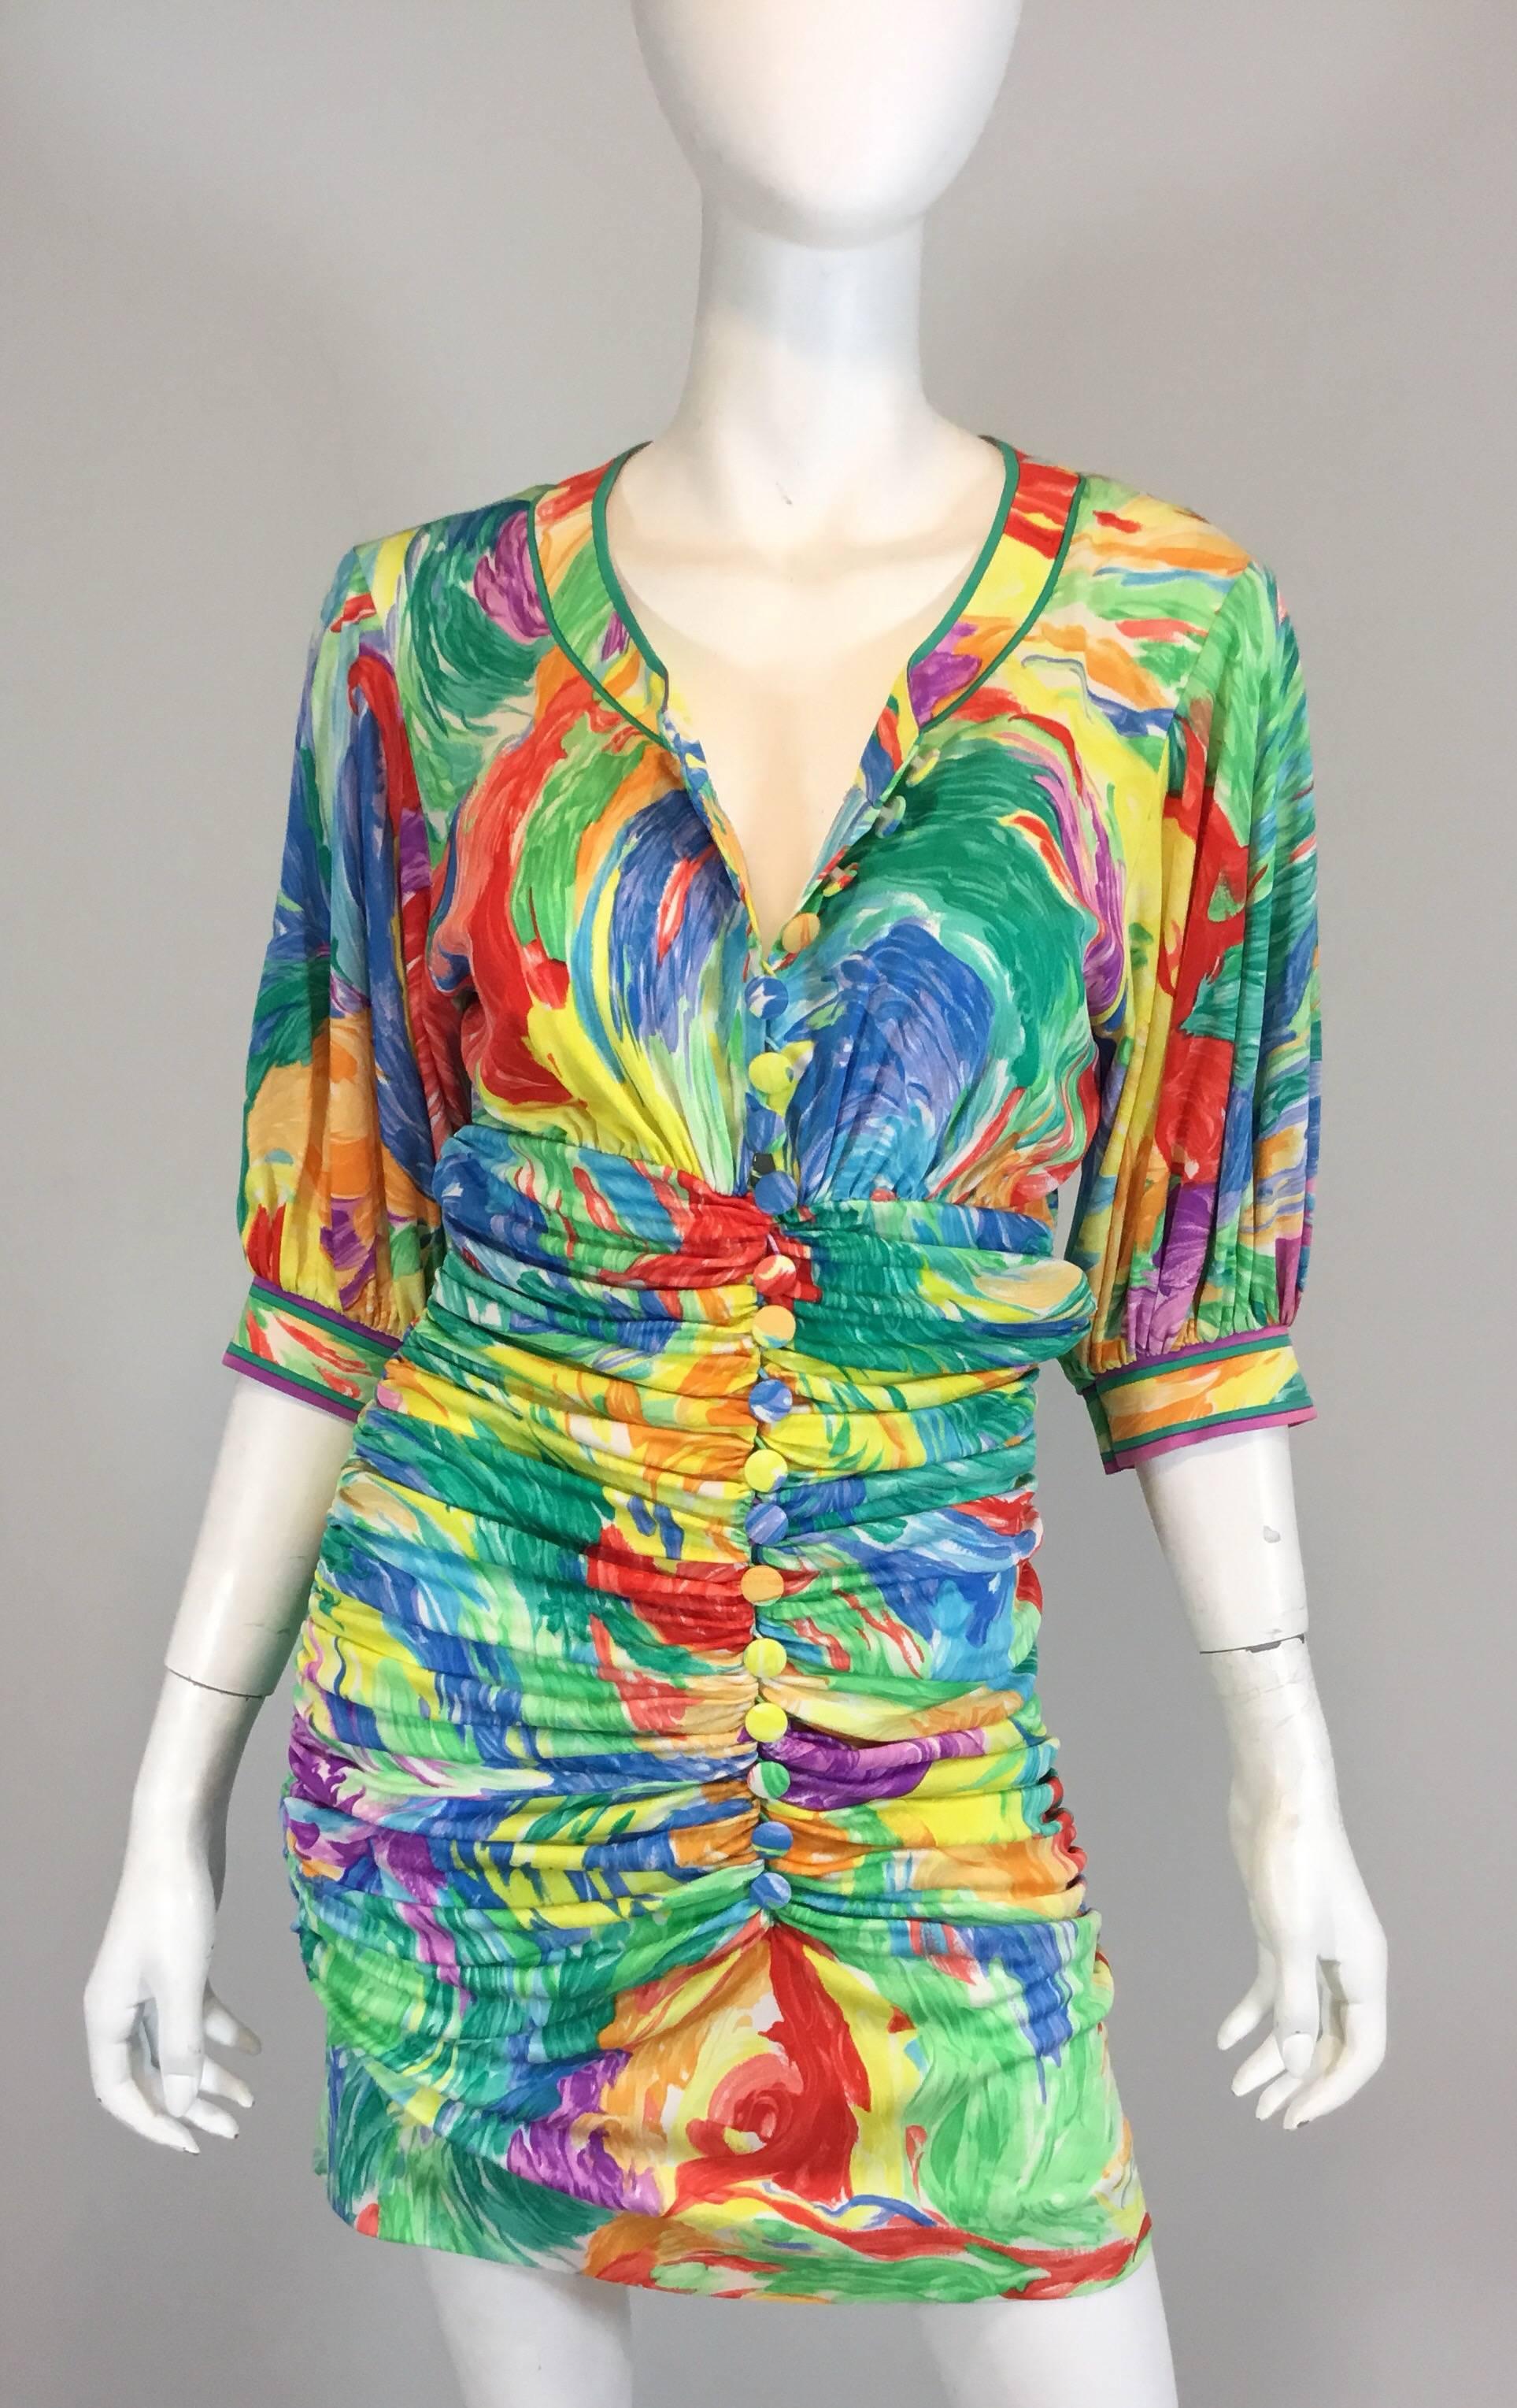 Leonard Paris silk jersey vintage mini dress features a vibrant firework print throughout with a ruched bodice, made of 100% silk jersey, and has button closures along the front. Made in France. Excellent condition. 

bust 36''
sleeves 14.5''
waist